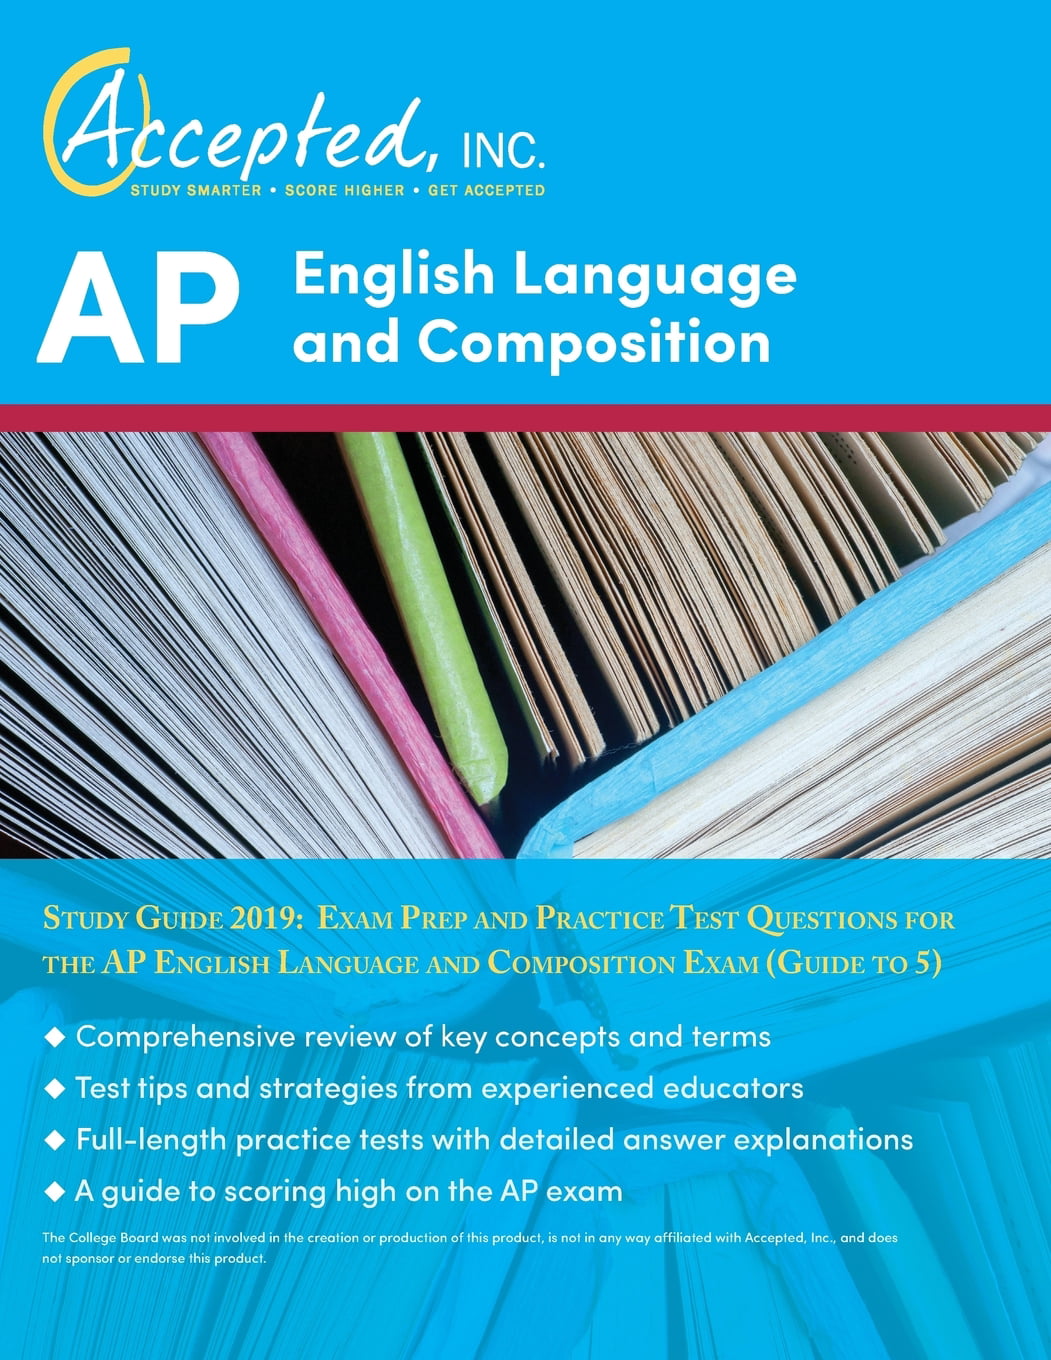 ap-english-language-and-composition-study-guide-2019-exam-prep-and-practice-test-questions-for